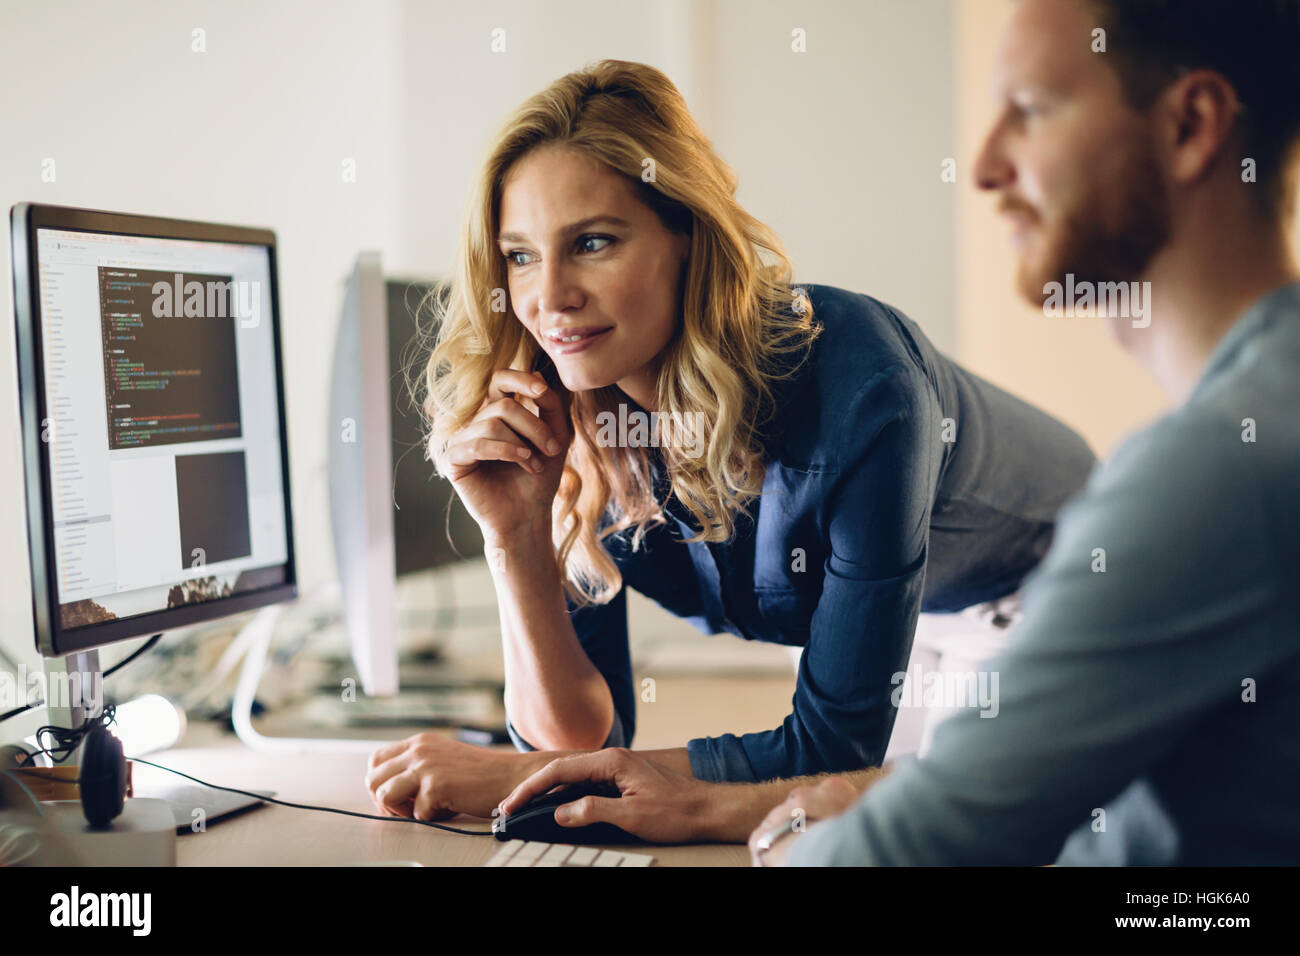 Programmer working in a software developing company office Stock Photo